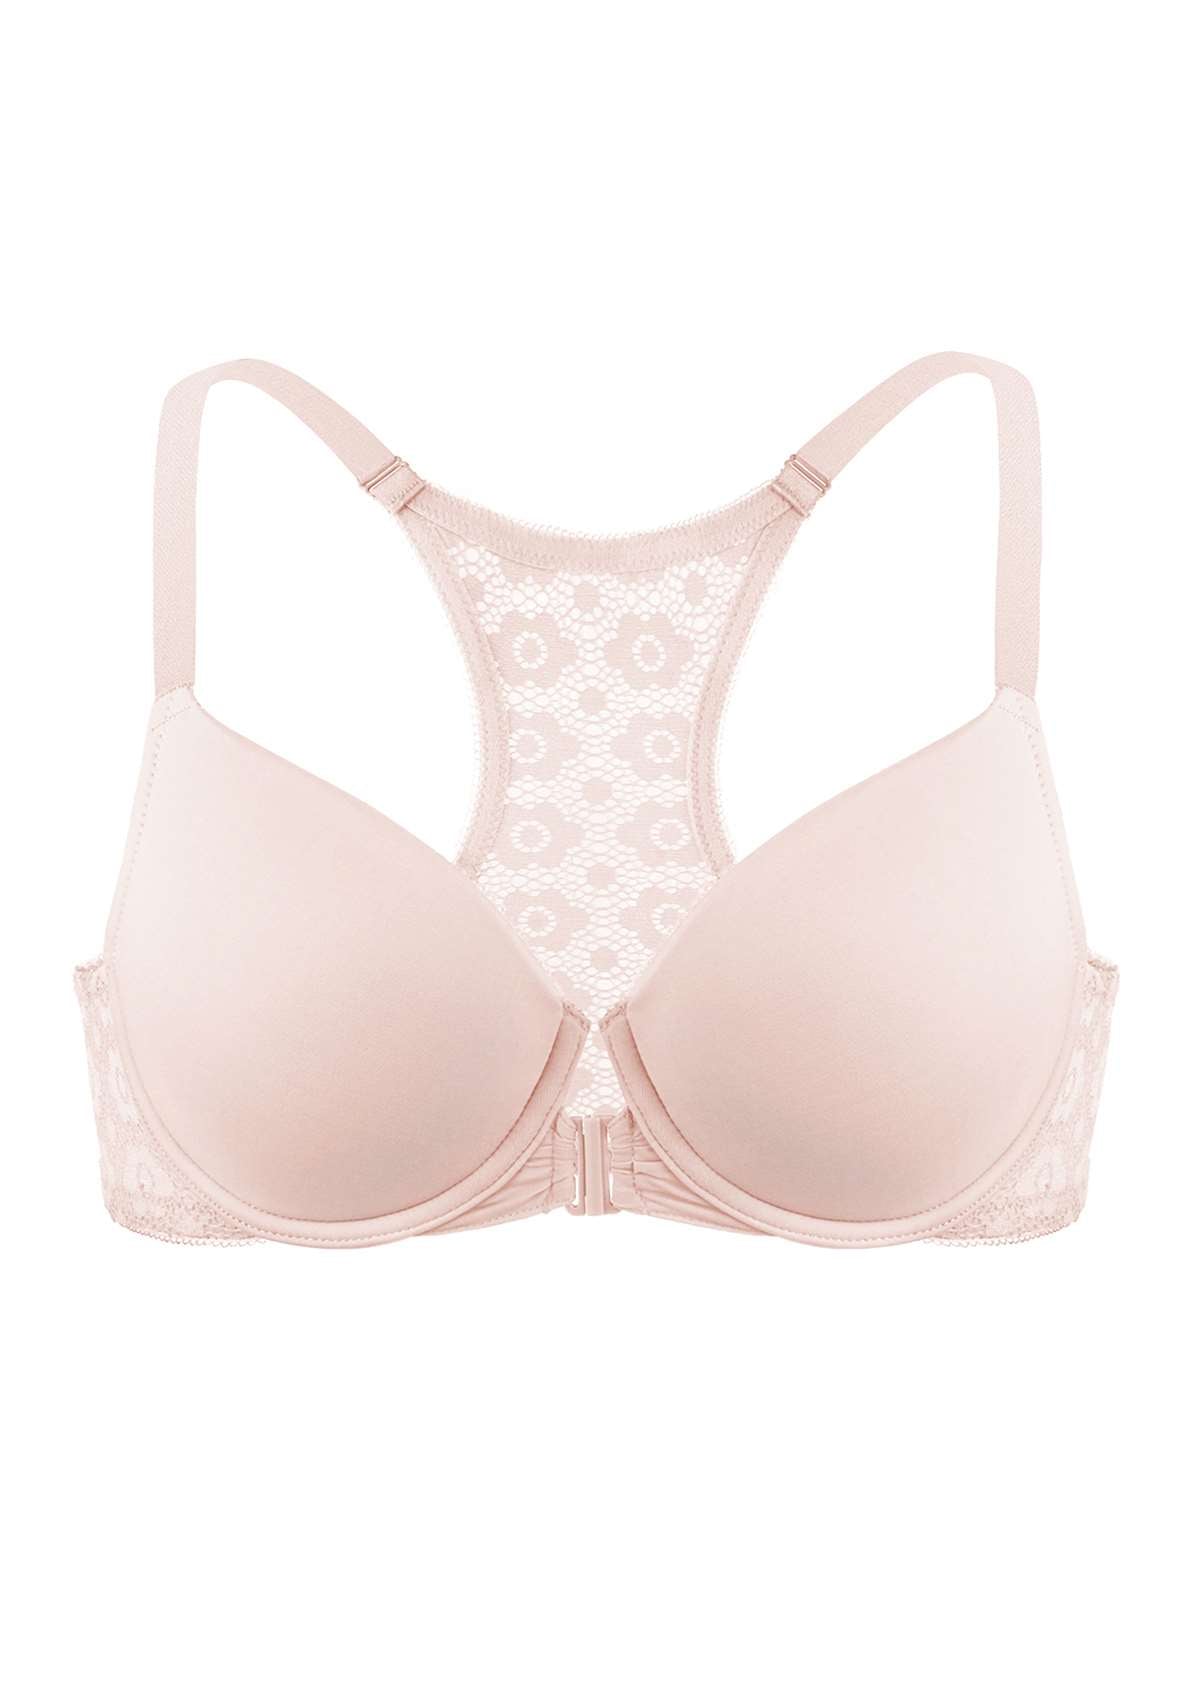 HSIA Serena Front-Close Lace Racerback Underwire Bra For Back Support - Pink / 38 / D